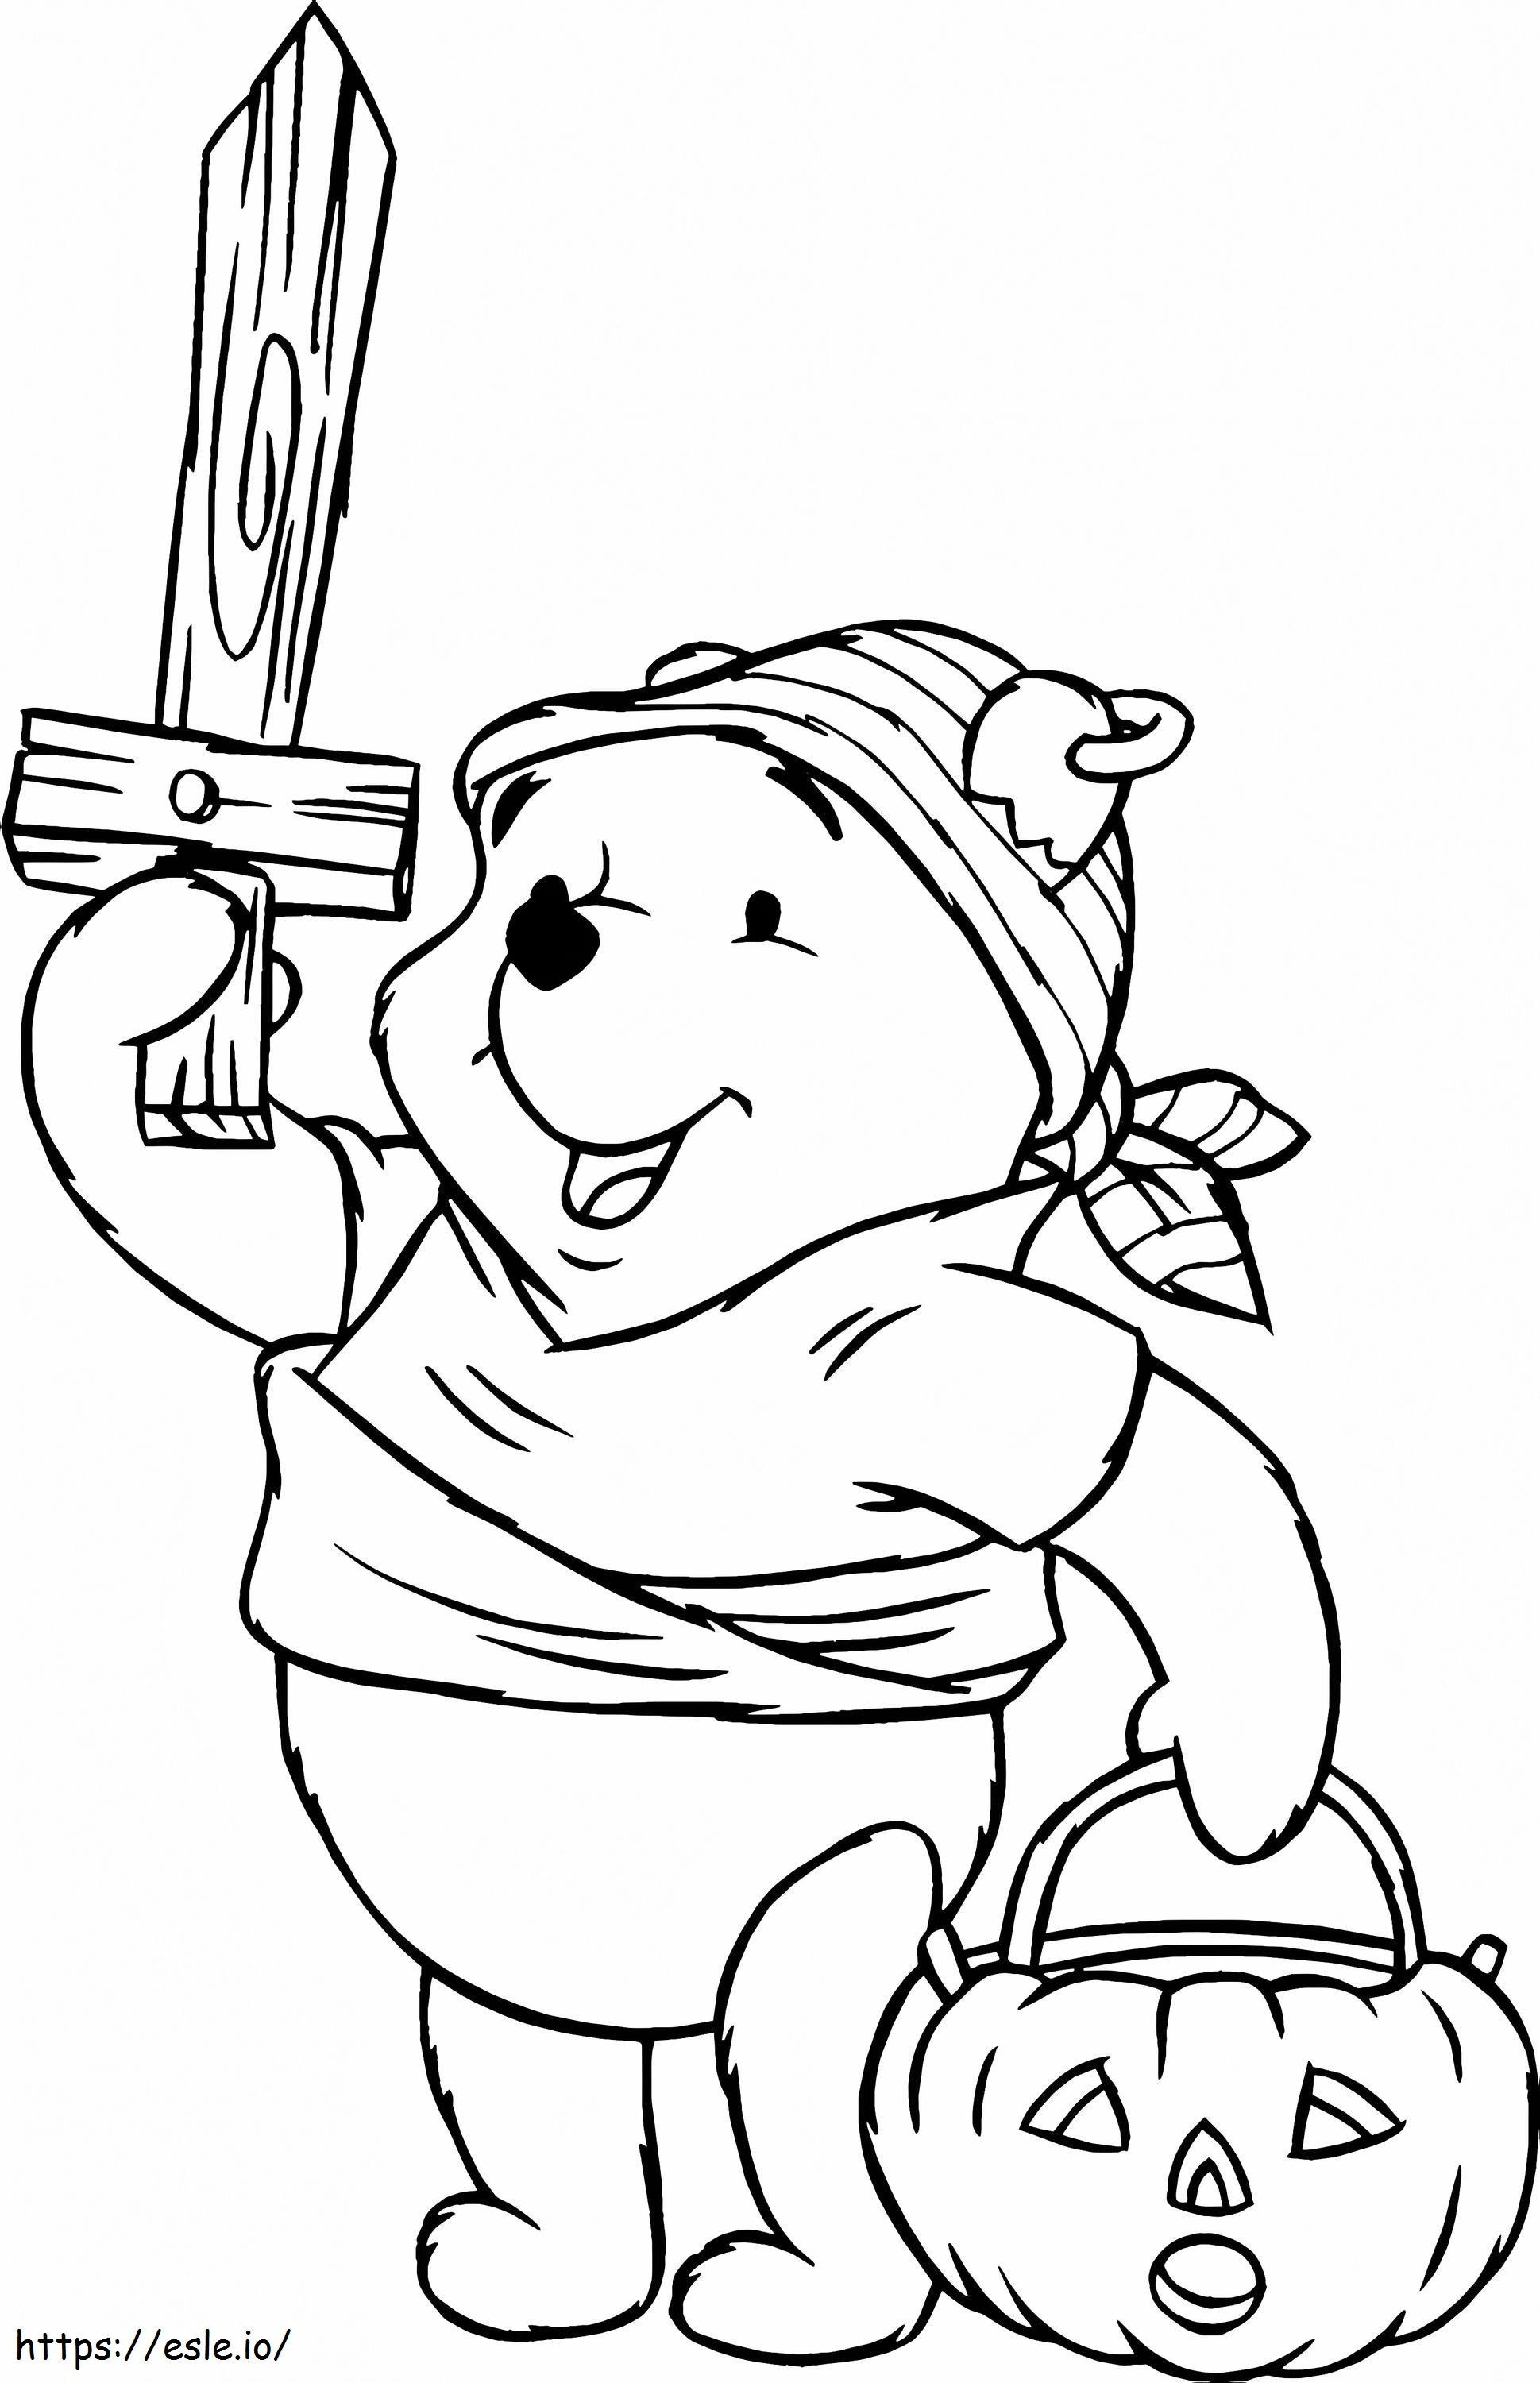 1539680490 Preschool Halloween Beautiful 99 Best Images On Pinterest Of Pics coloring page